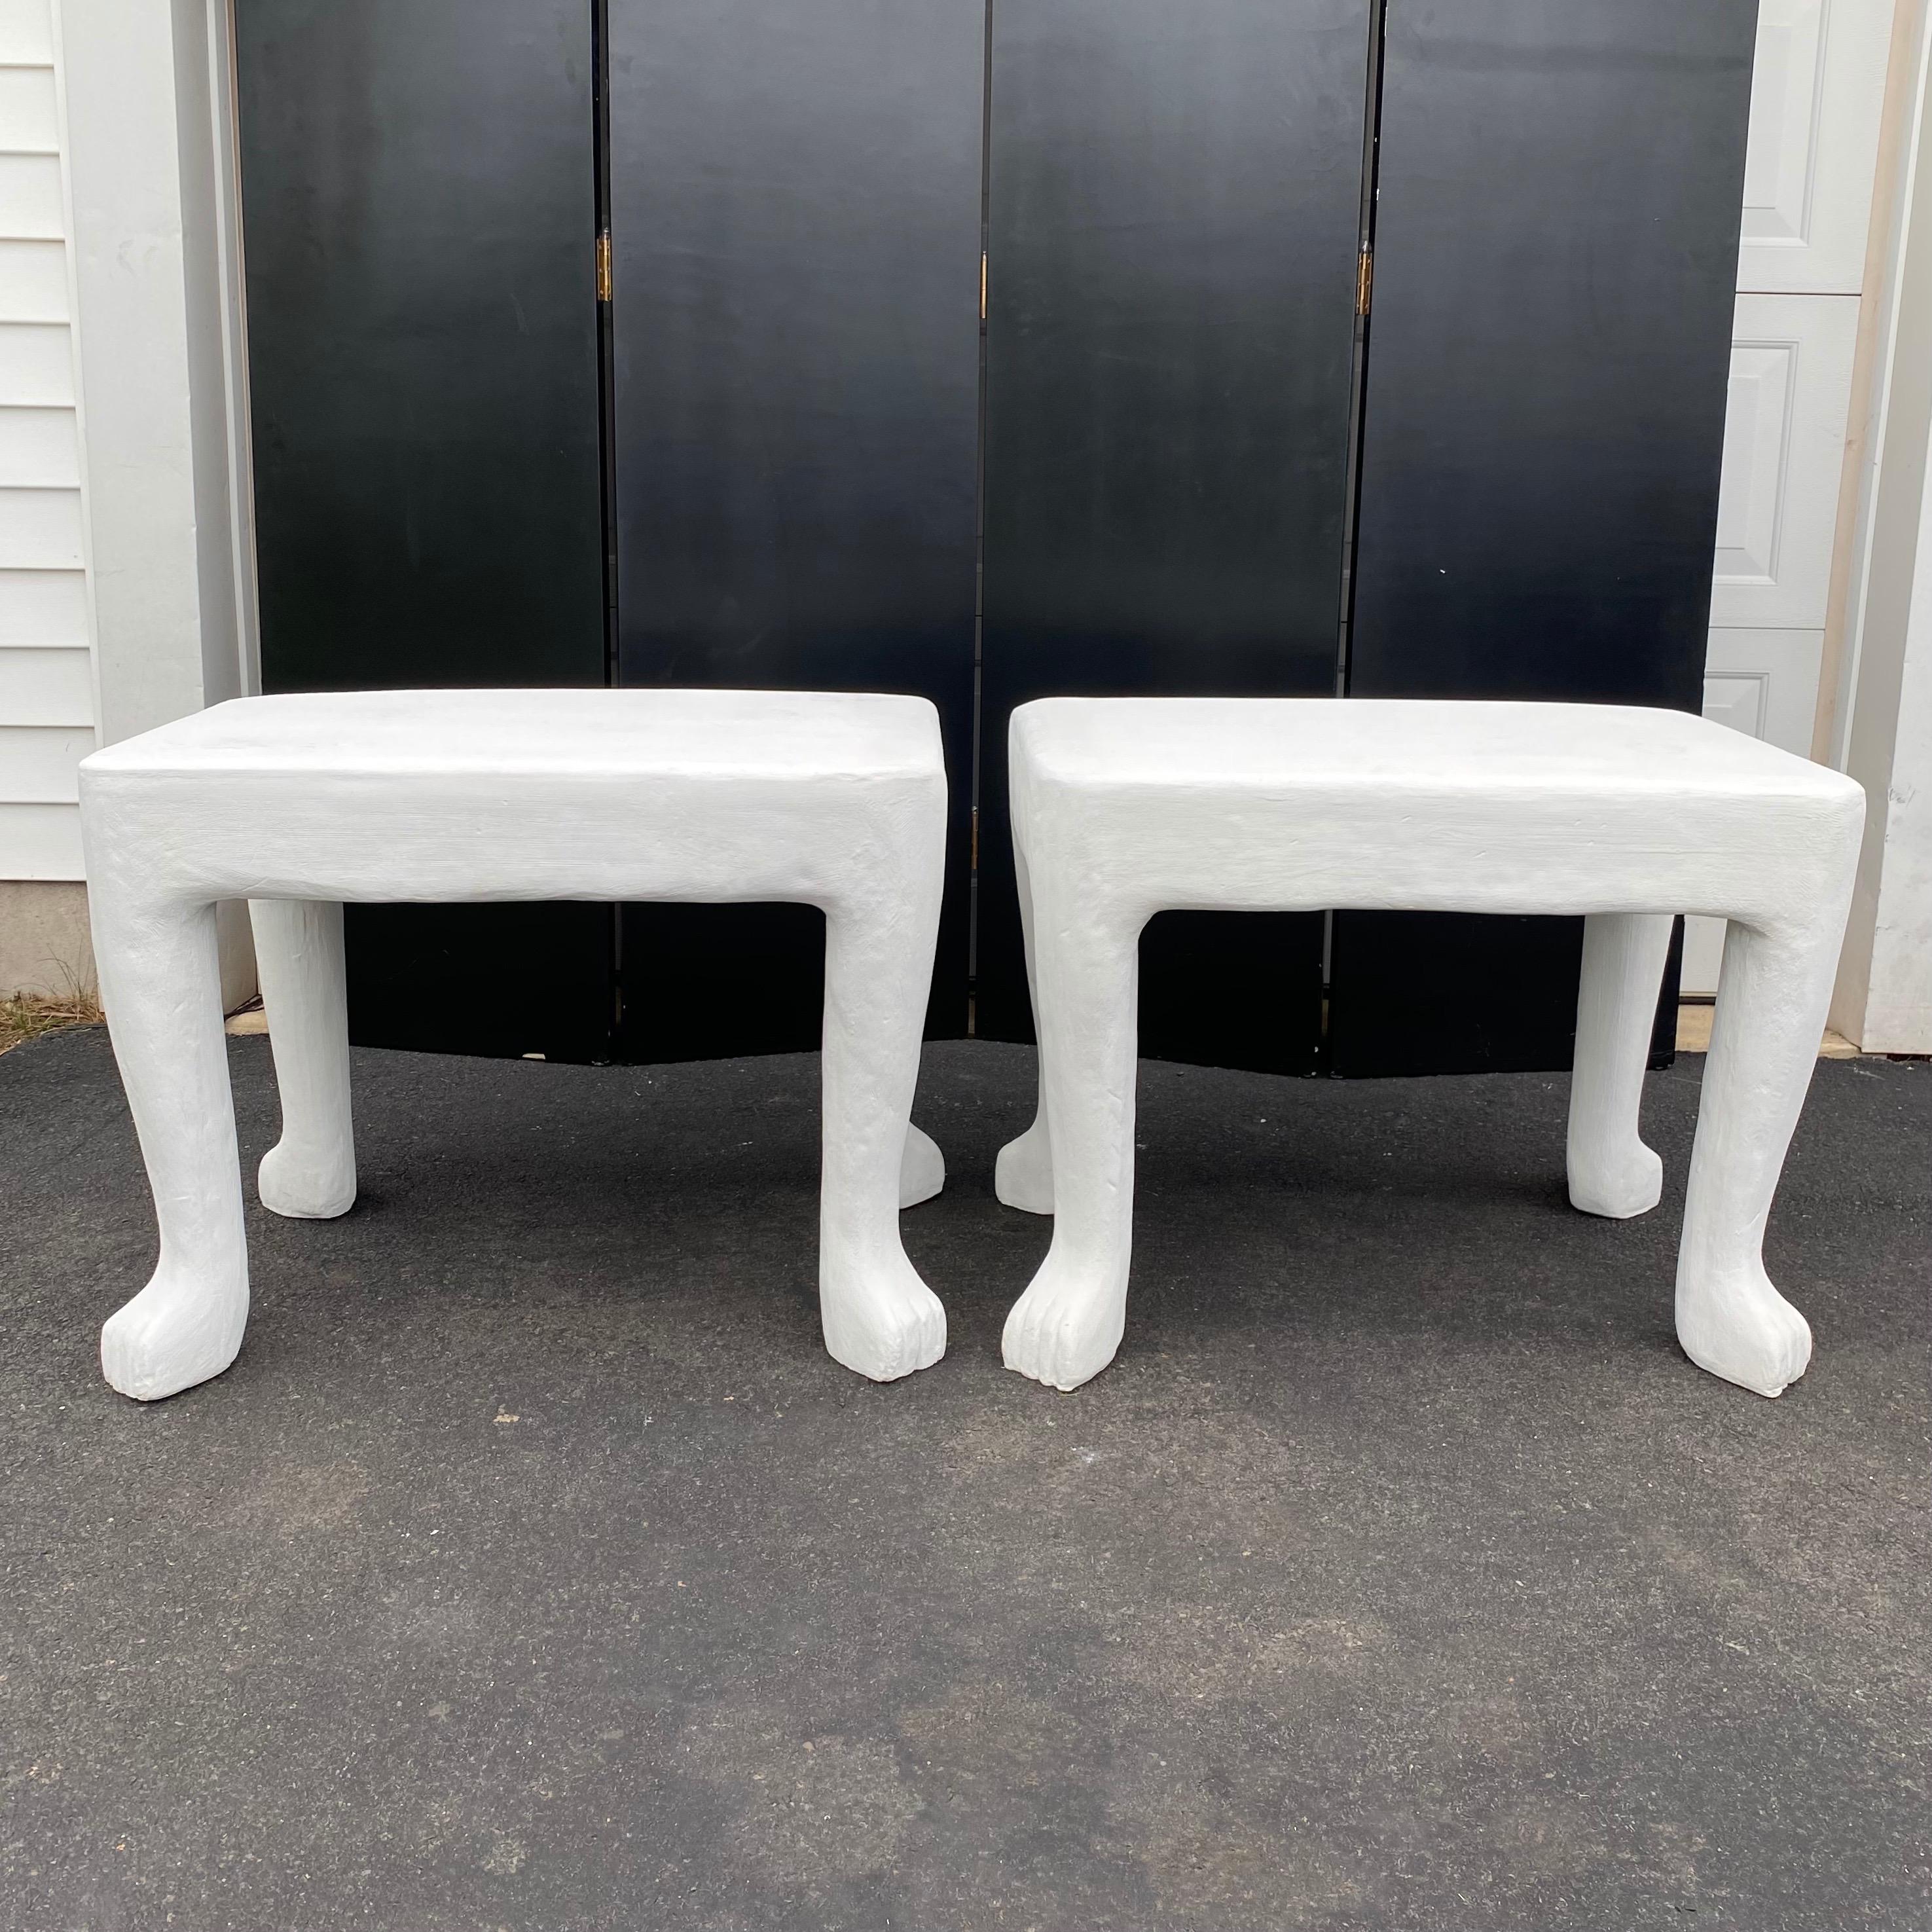 Organic Modern Sculptural John Dickinson Footed Side End Coffee Tables, Plaster White Pair